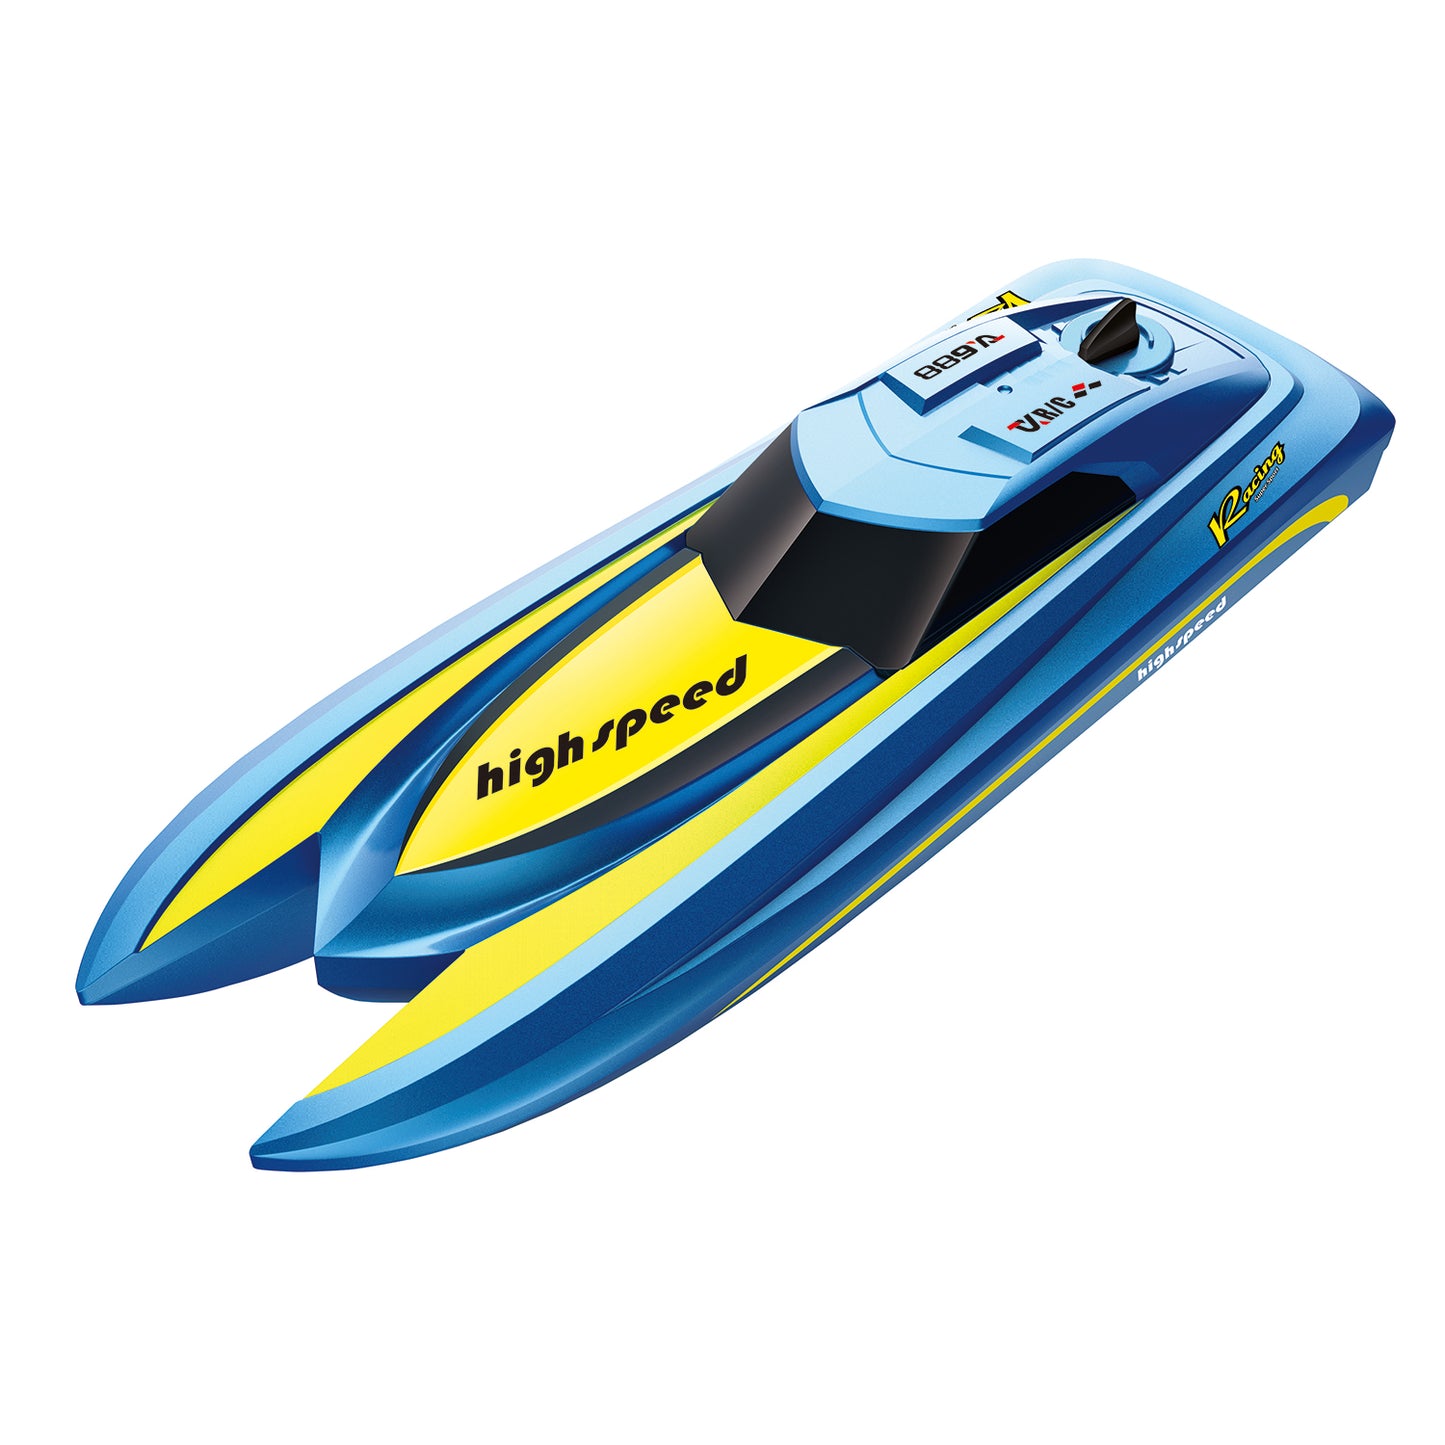 TOUCAN Plastic RC Boat Electric RTR Radio Controlled Racing Ship High Speed Boat Pool Lake Toy for Kids Adults Painted Assembled